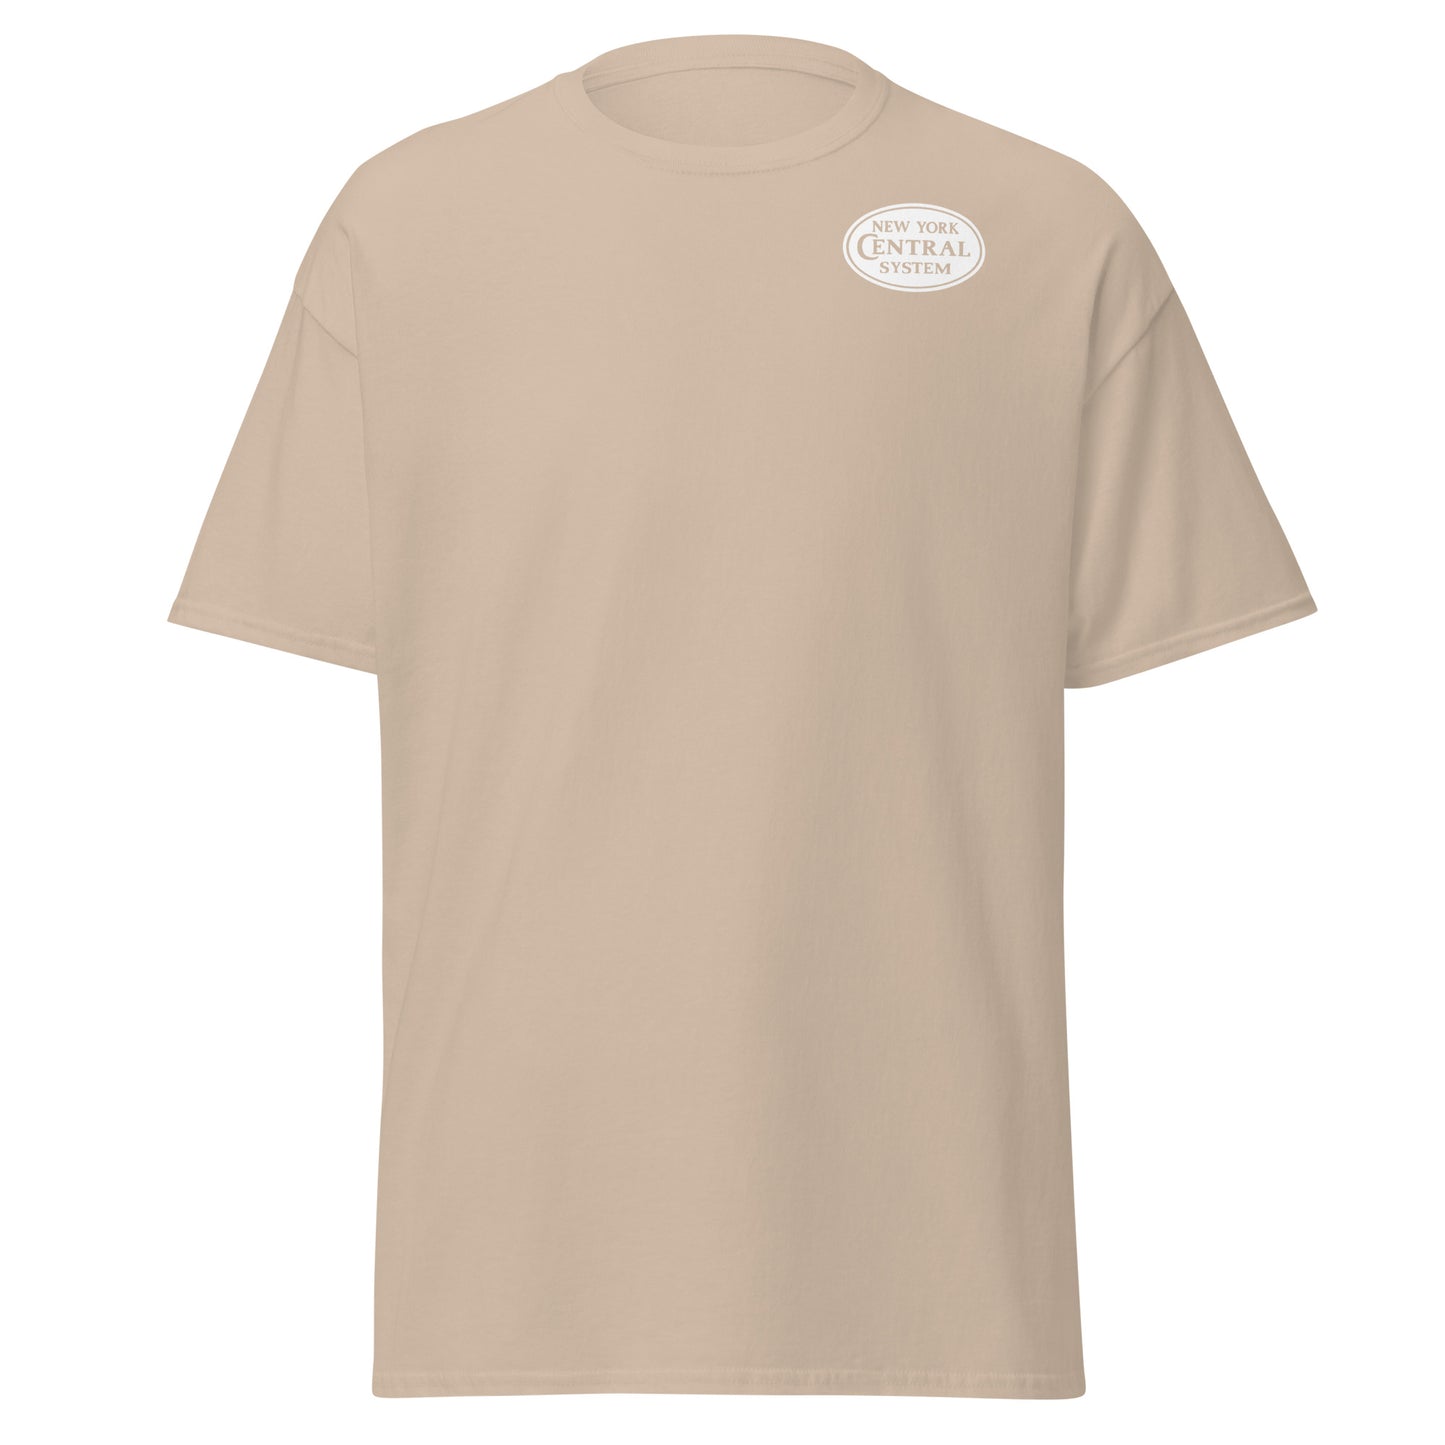 New York Central classic tee